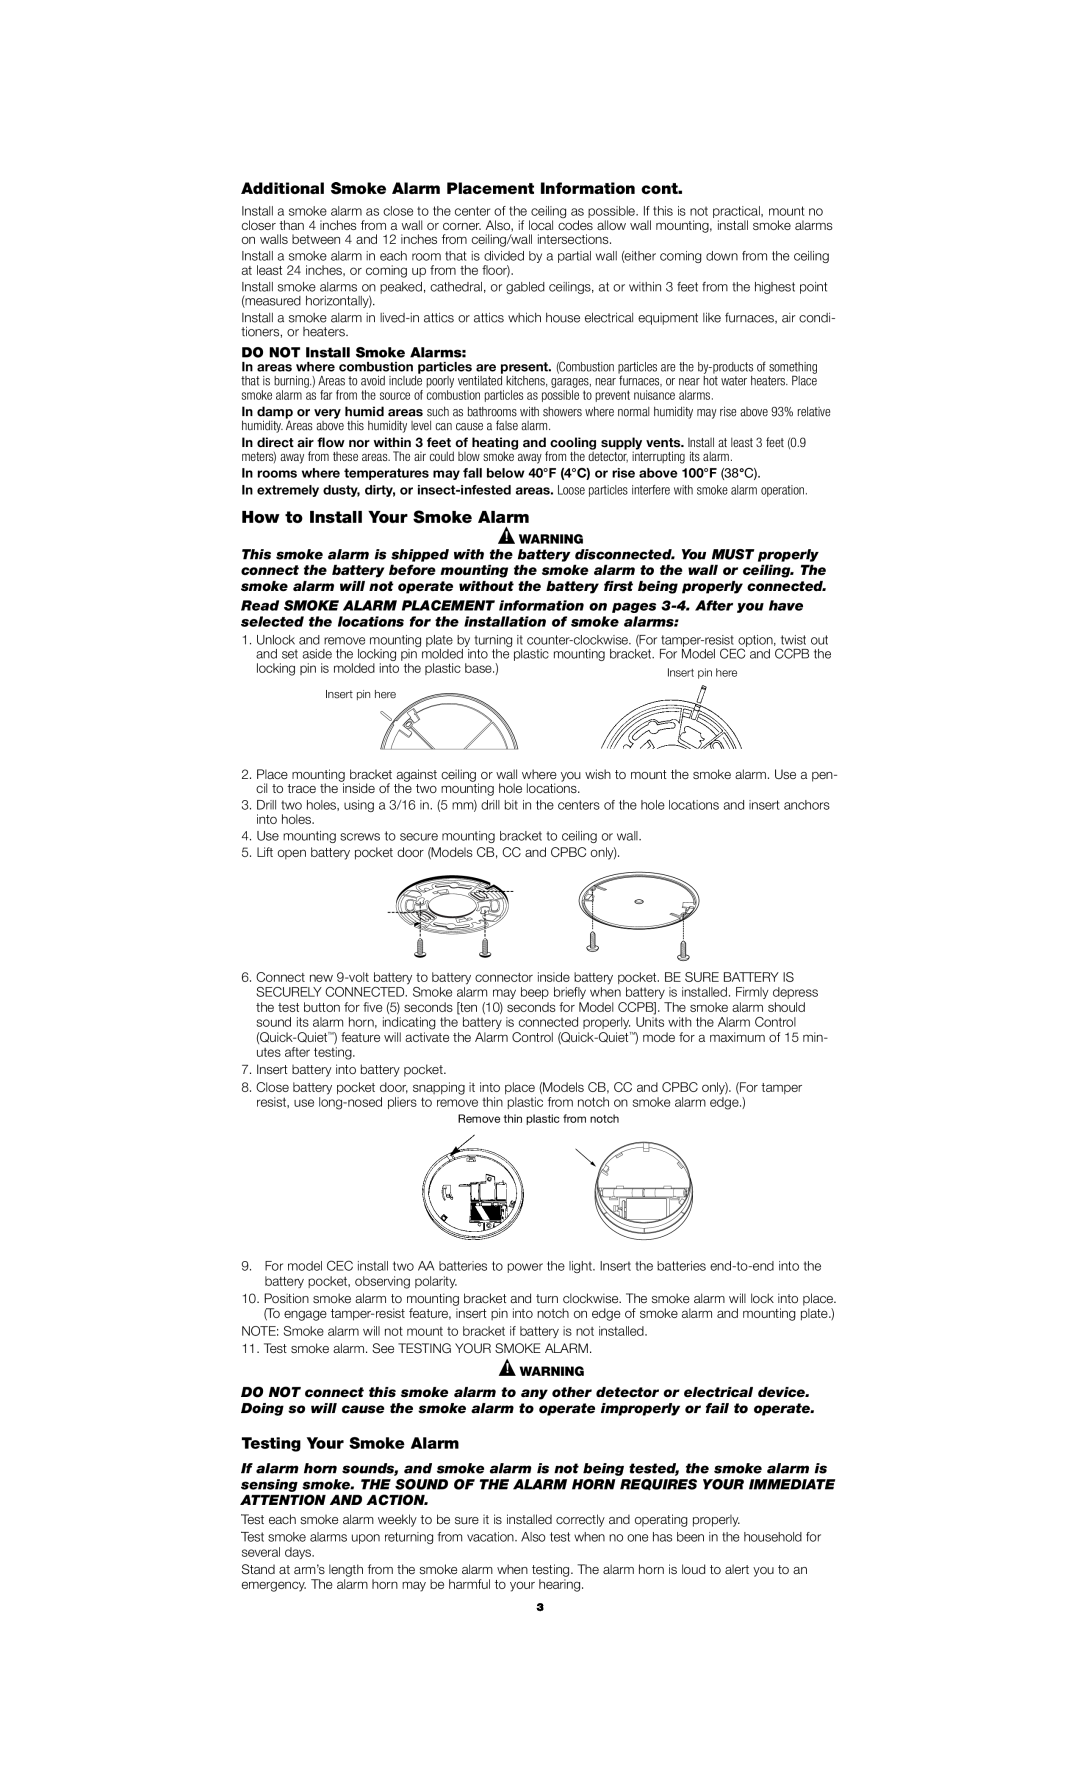 Firex 110-1011E owner manual How to Install Your Smoke Alarm, Additional Smoke Alarm Placement Information cont 